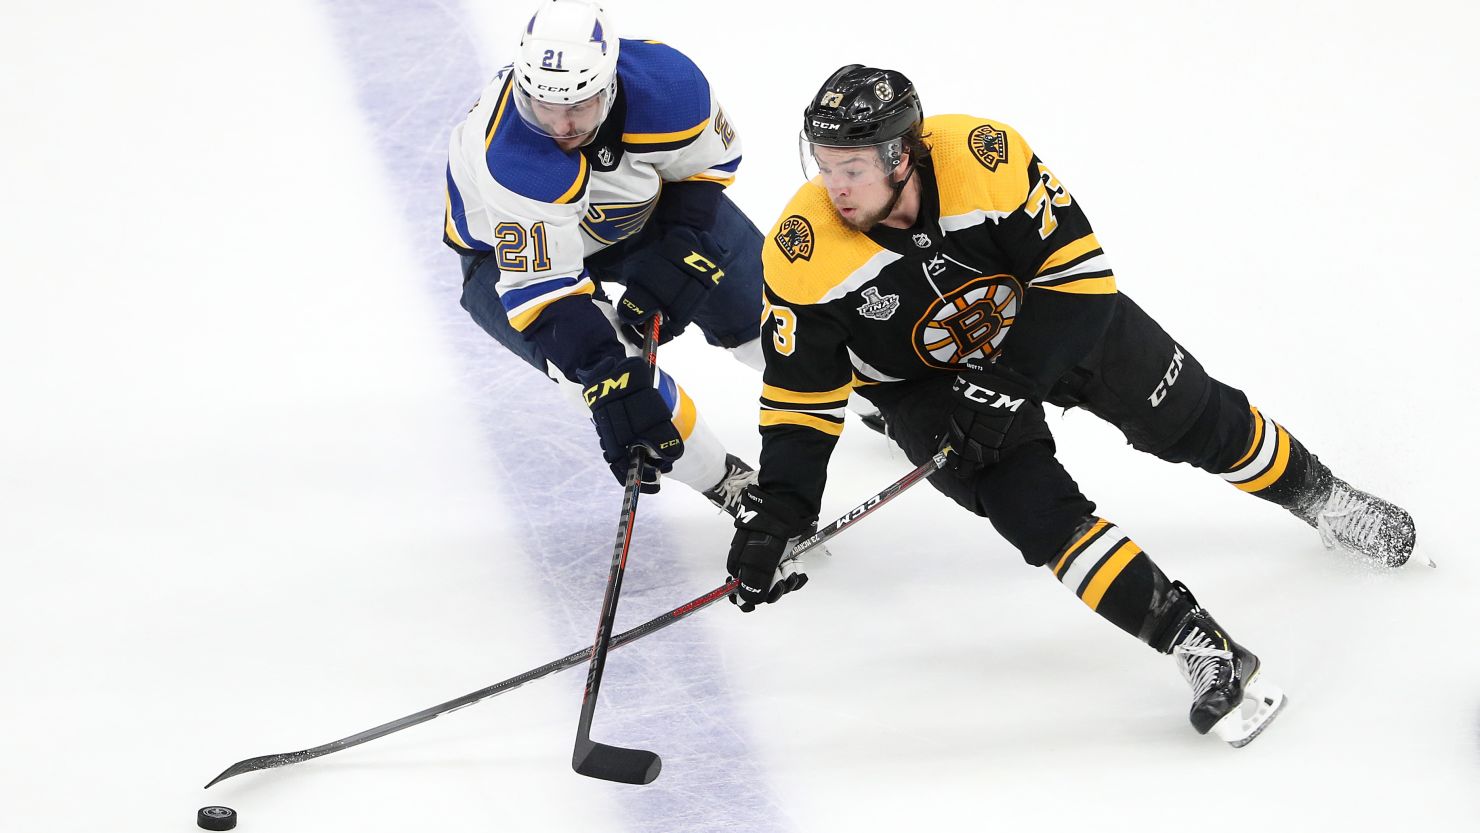  Charlie McAvoy, of the Boston Bruins, is defended by Tyler Bozak, of the St. Louis Blues, during the second period in Game 7.